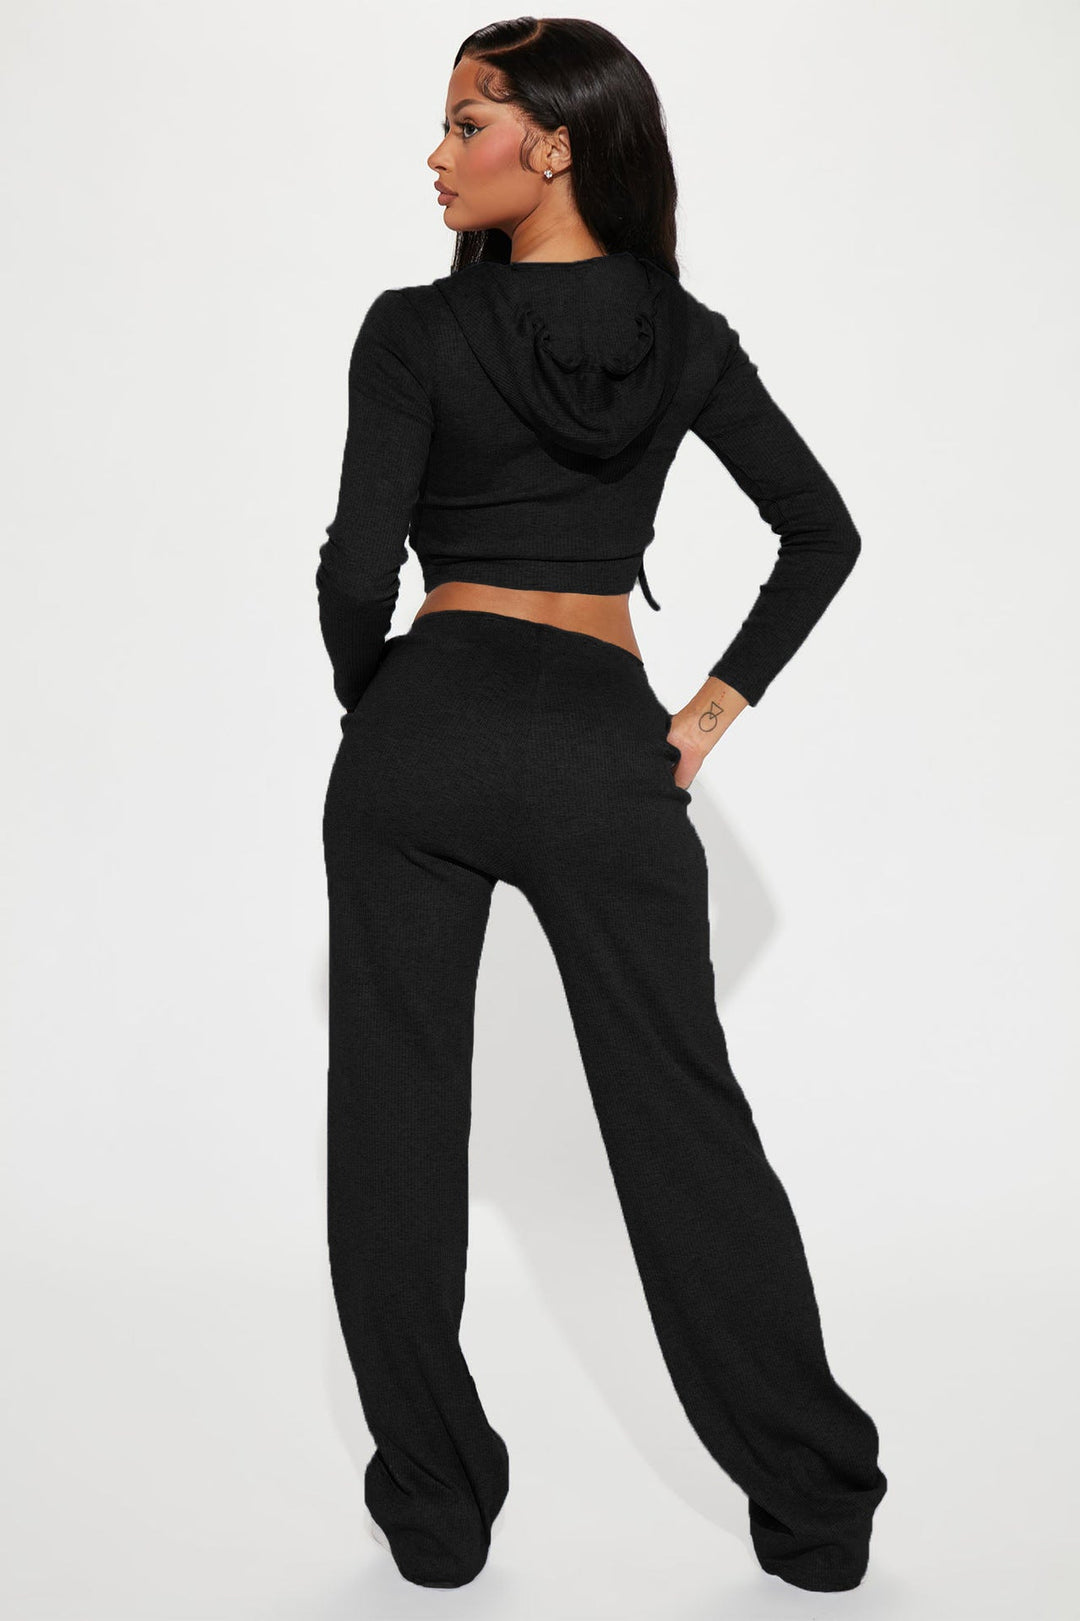 Ultra-flattering Look Hooded Crop Top and Pants Tracksuits 